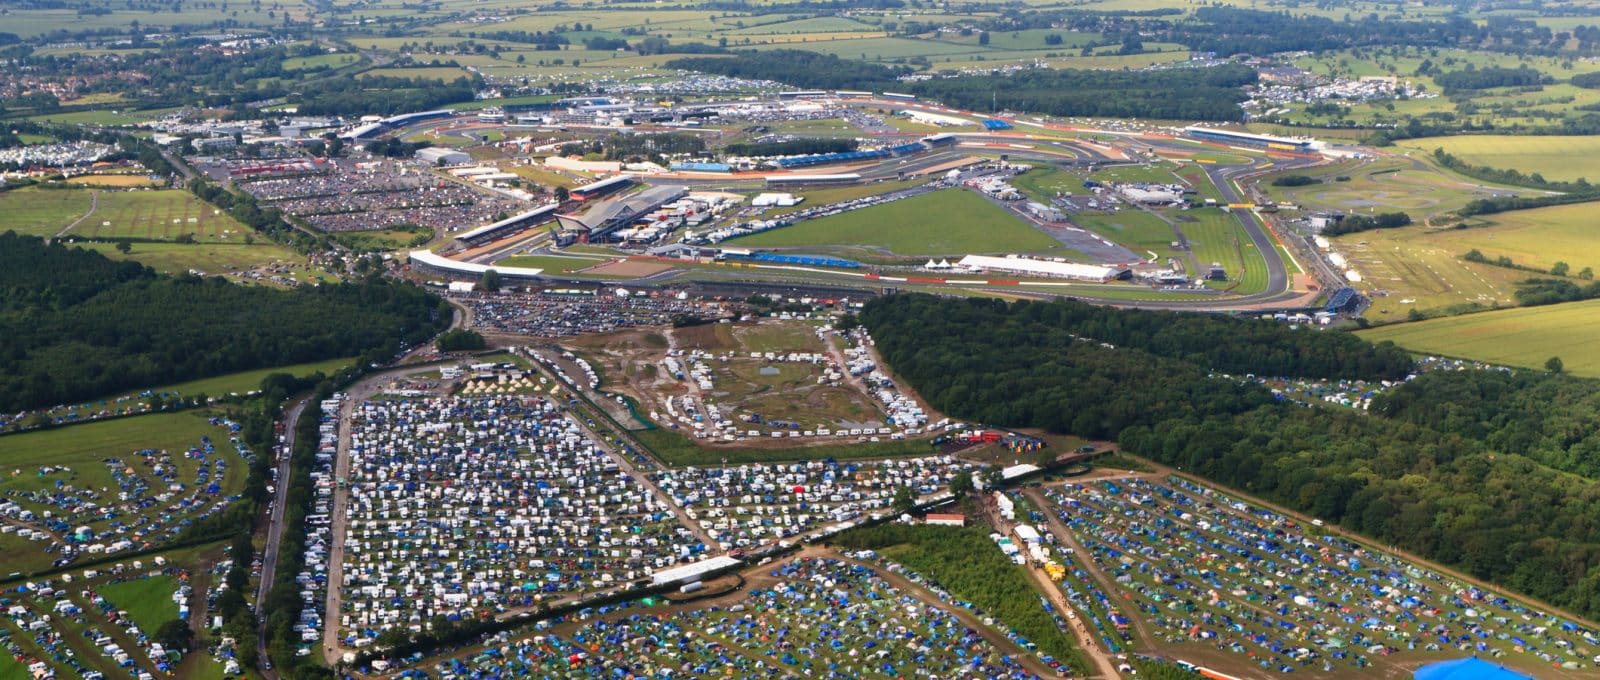 How to get to Silverstone Circuit